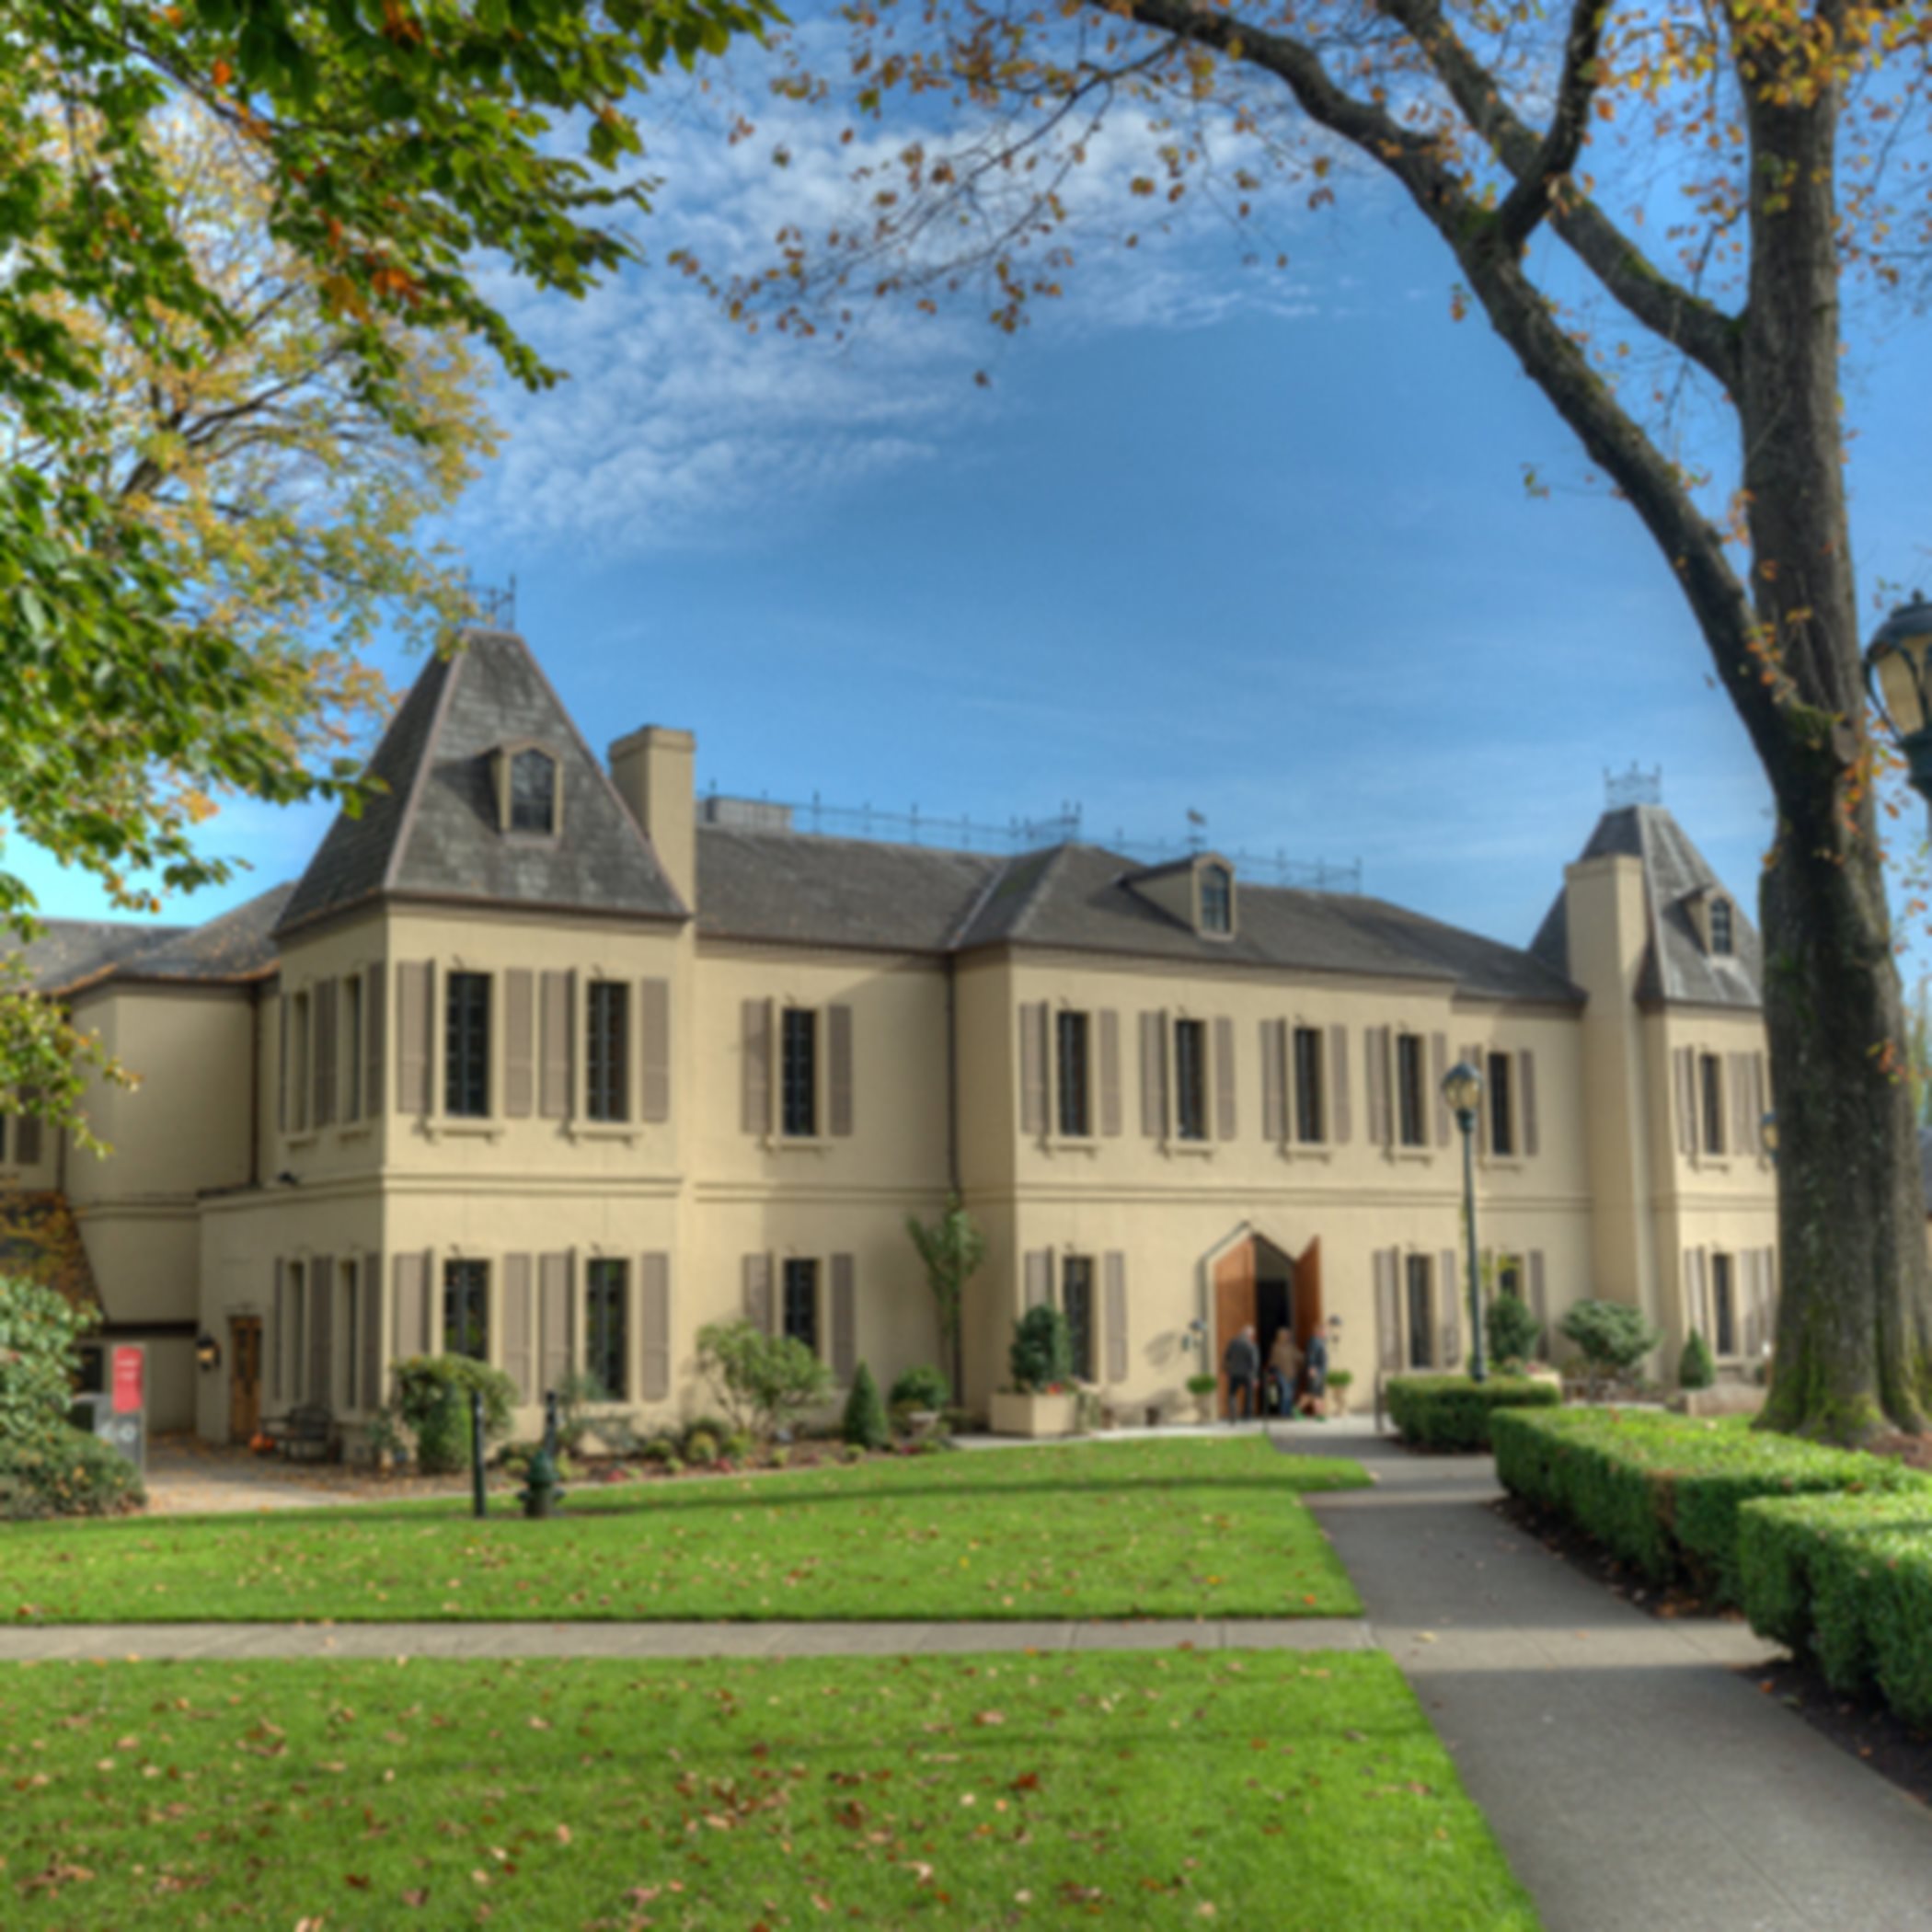 A classic French-style building with hip rooflines, towers and pairs of windows on both floors